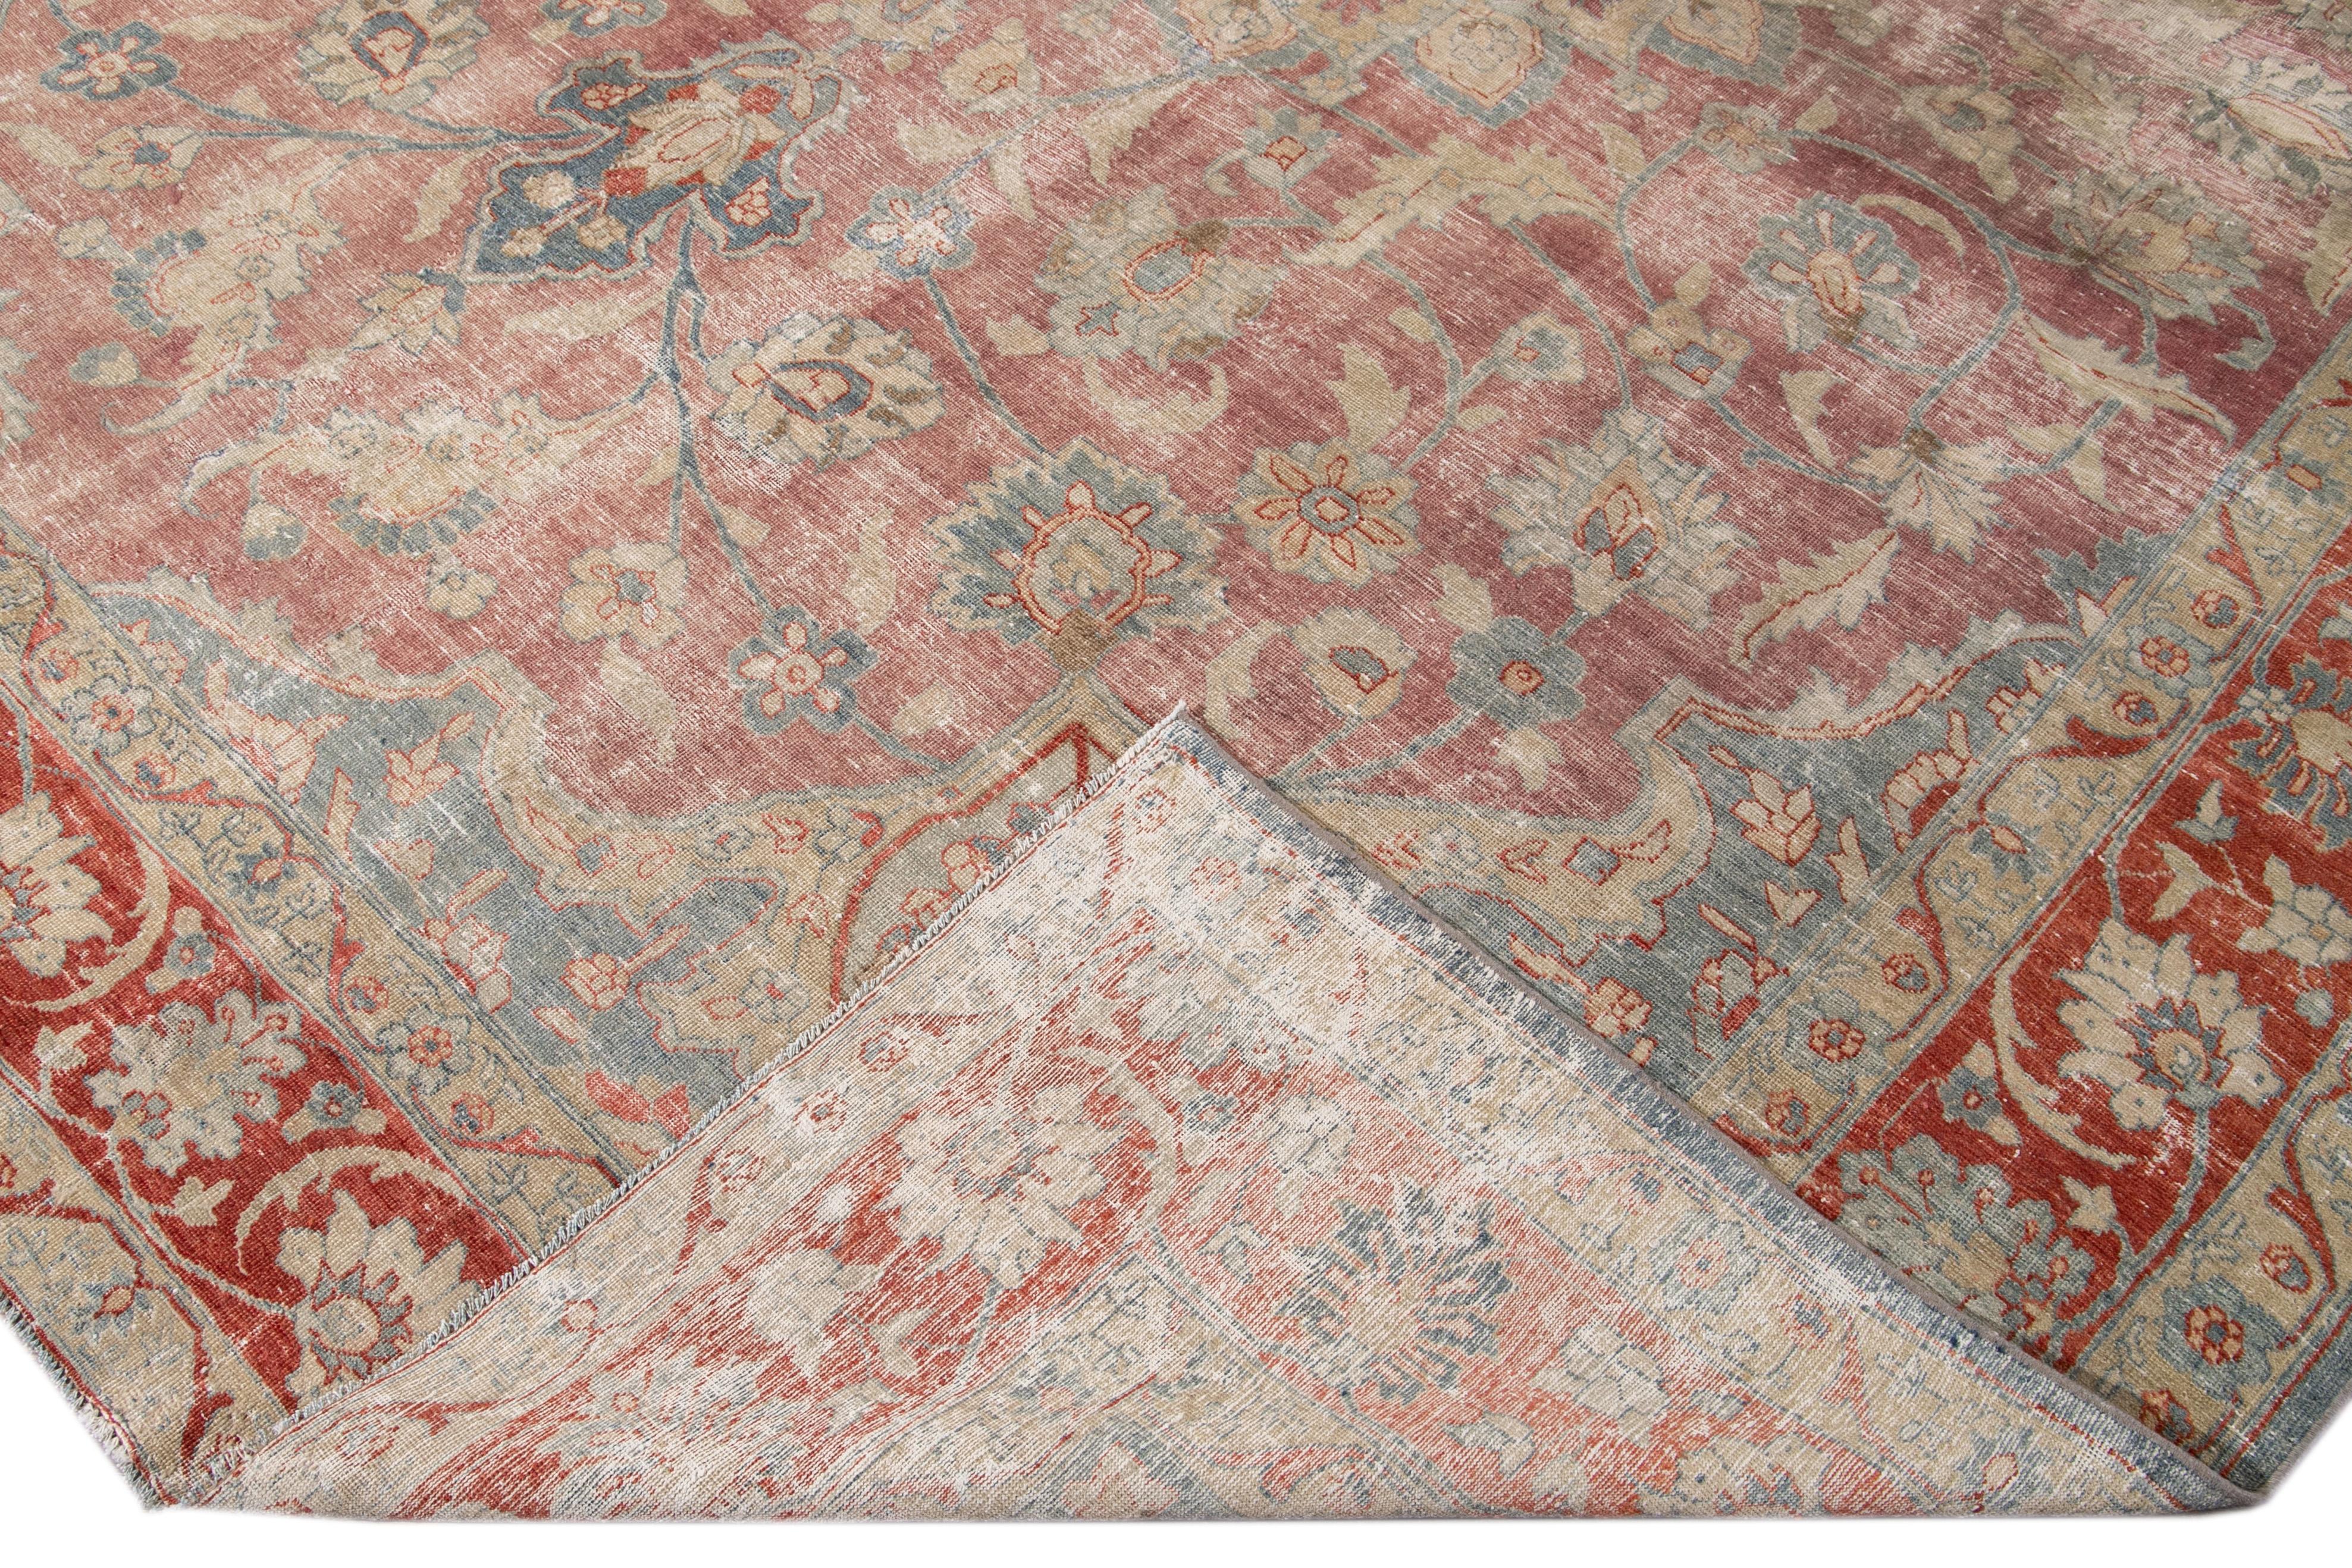 Beautiful antique Persian Tabriz hand-knotted wool rug with a red and blue field. This Tabriz has a rusted frame and multi-color accents in a gorgeous all-over center-medallion floral distressed design.

This rug measures: 11'3